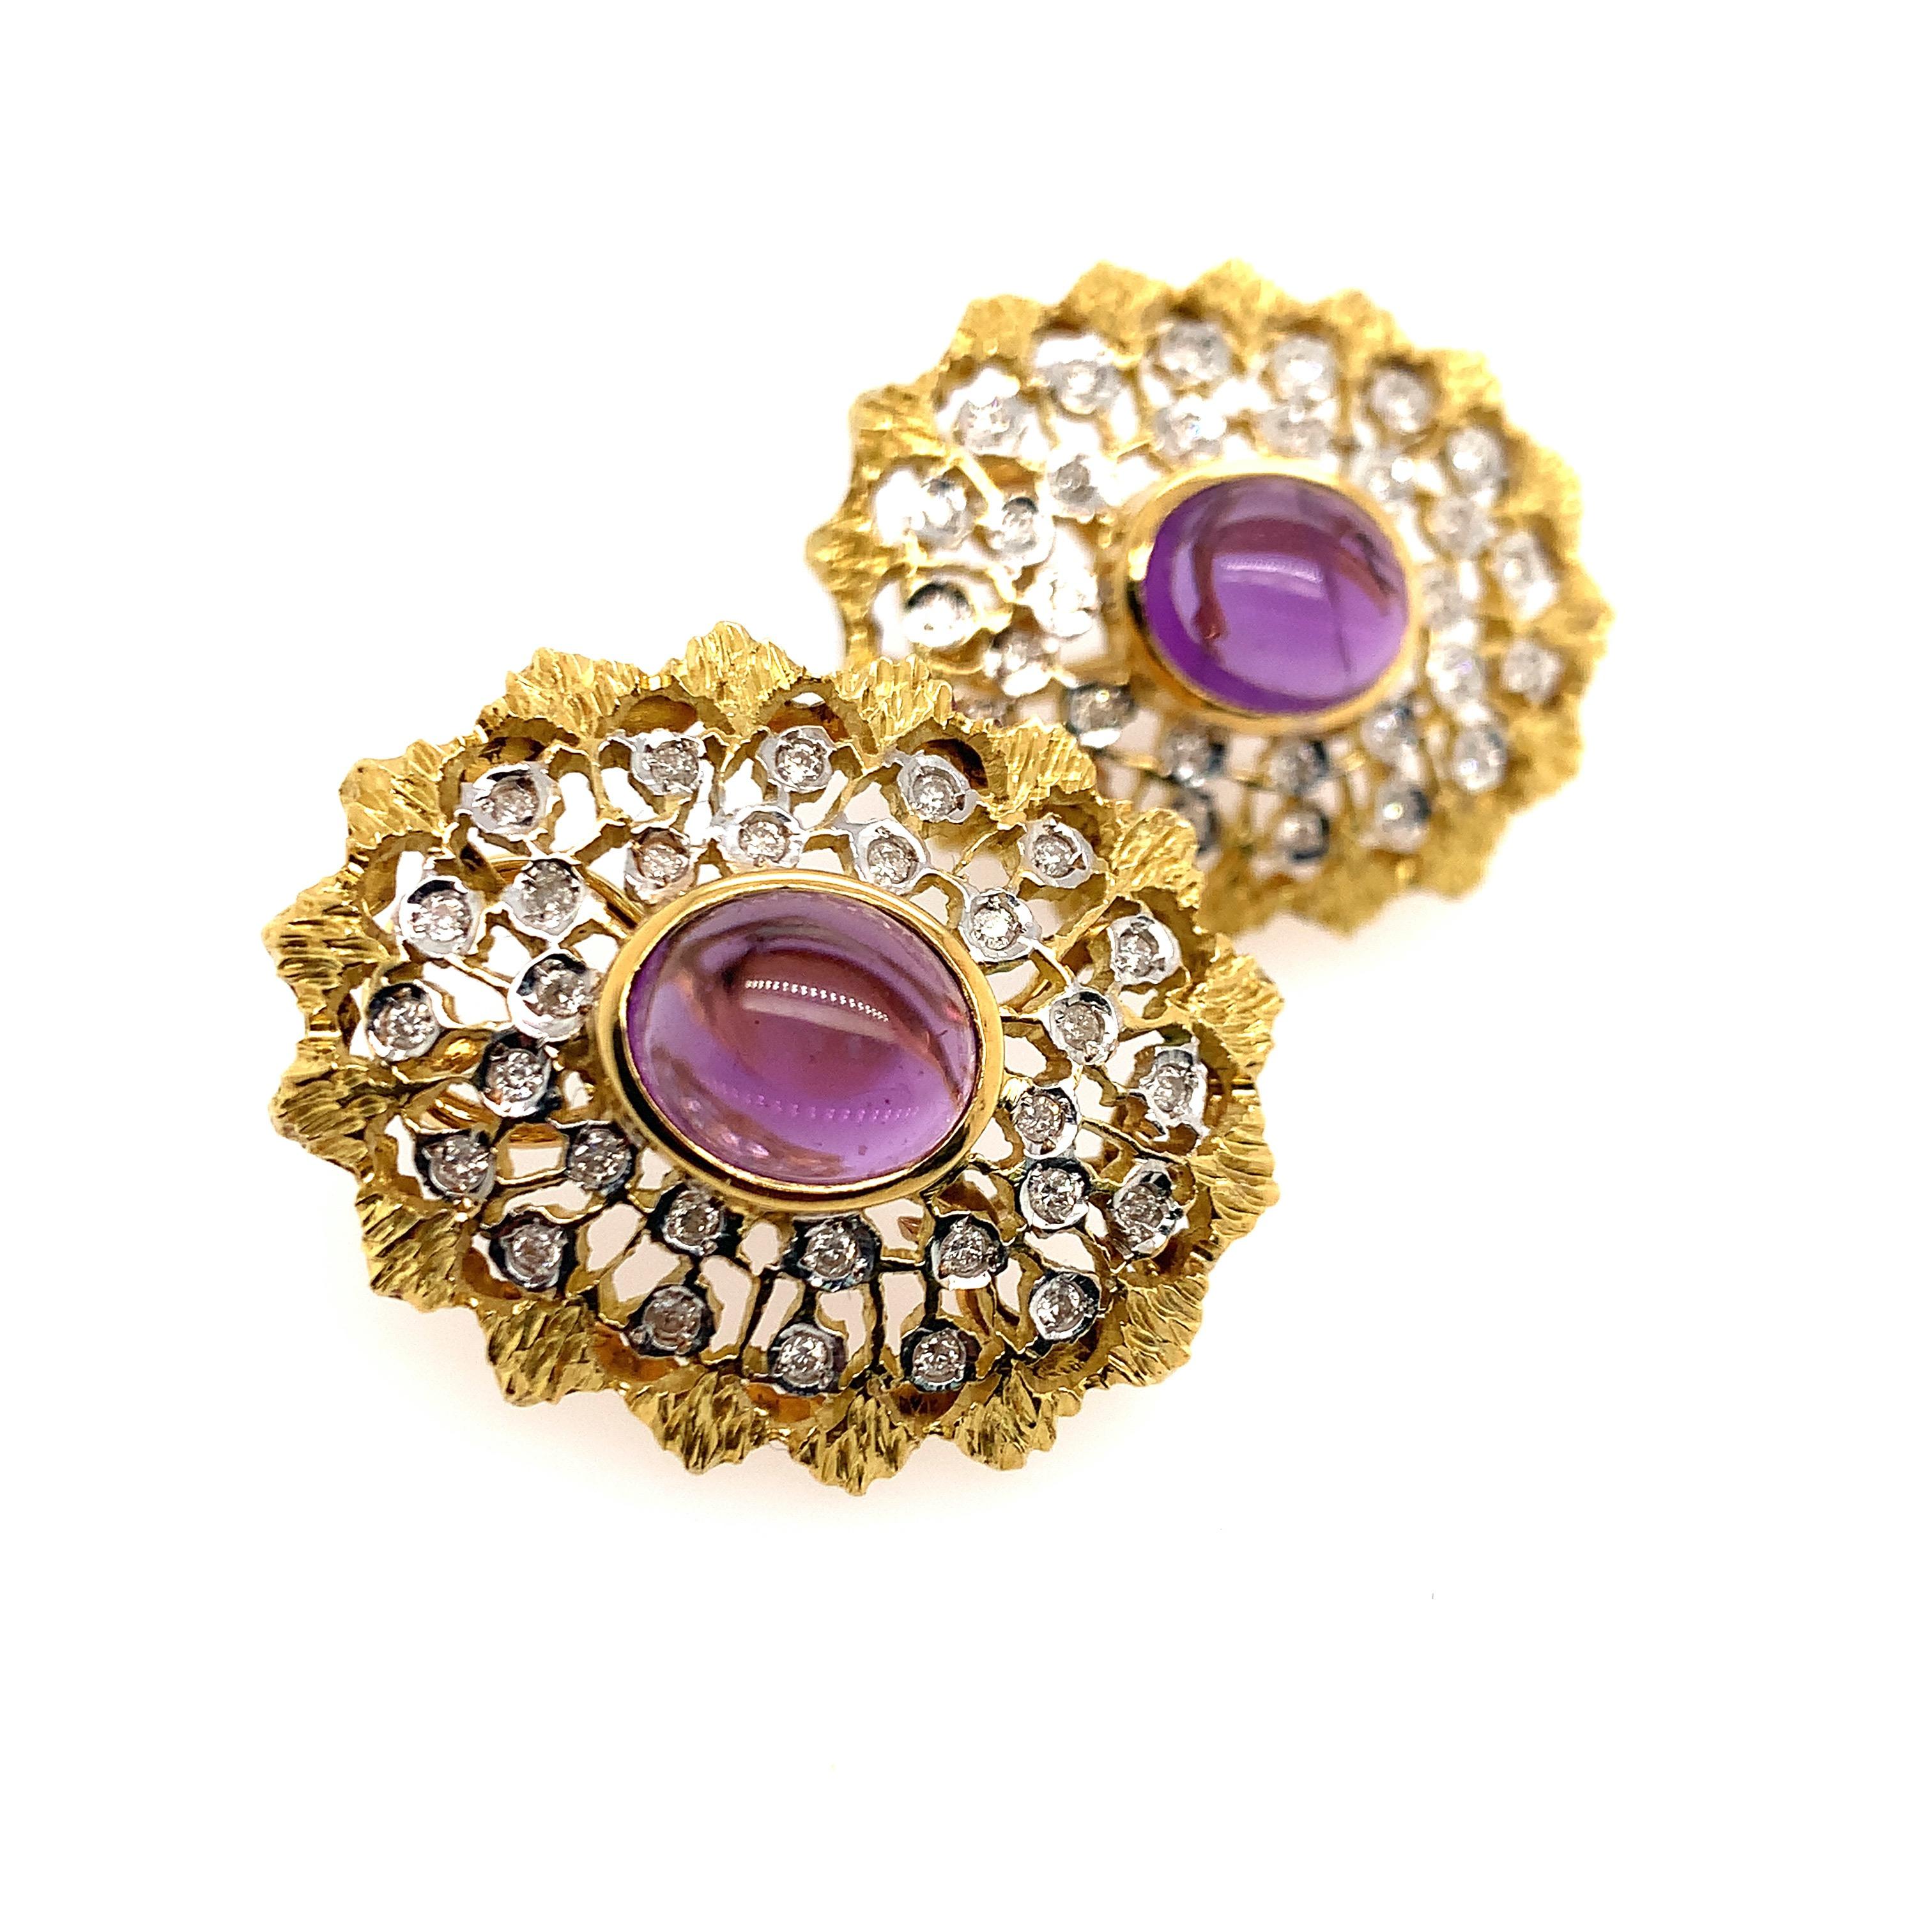 The large oval forms set with a pair of cabochon amethysts weighing approximately 8.00 carats, amid textured and pierced surrounds accented by round diamonds, in 18k white and yellow gold

Weight: 23.6 grams
Earrings measuring 27 x 34 mm
Diamonds